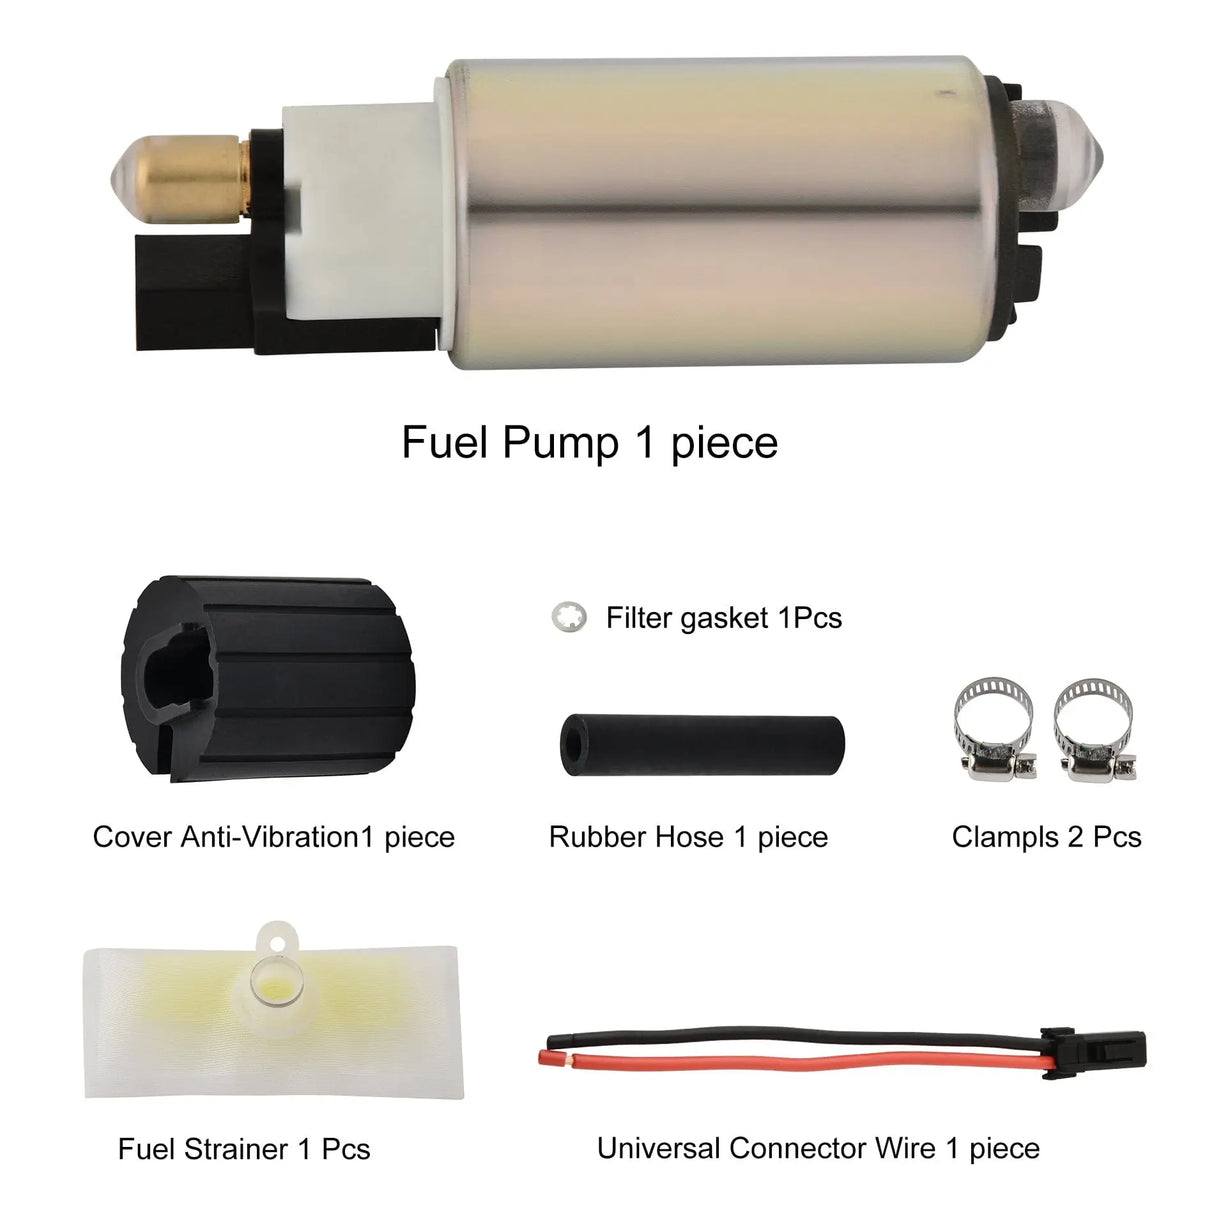 Evilenergy EVIL ENERGY Intank Electric Fuel Pump Kit E2157 Compatible with Ford Explorer Escape Lincoln Continental